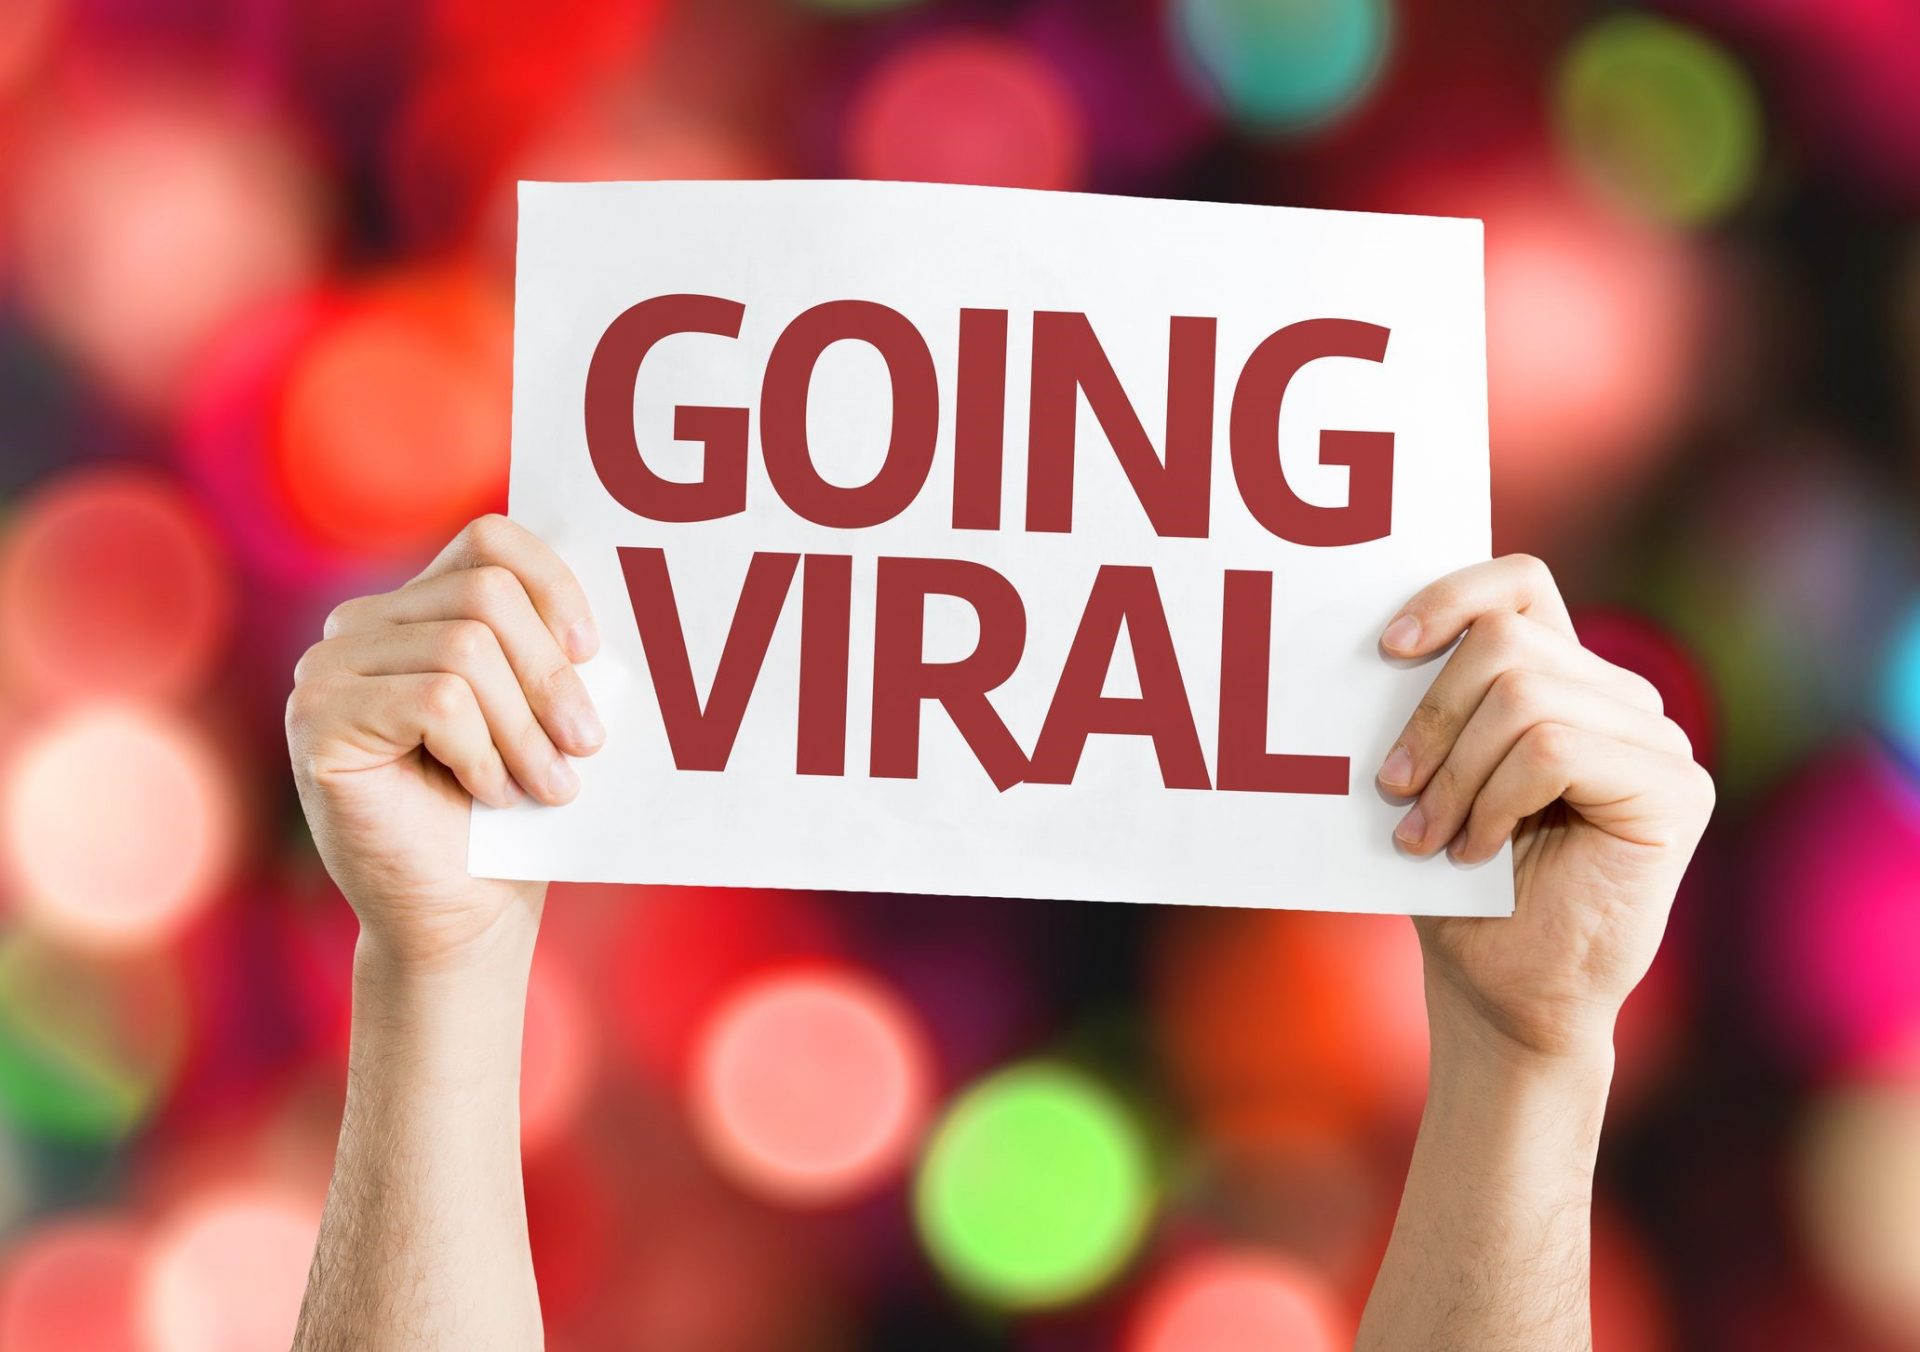 Viral videos and copyright concerns